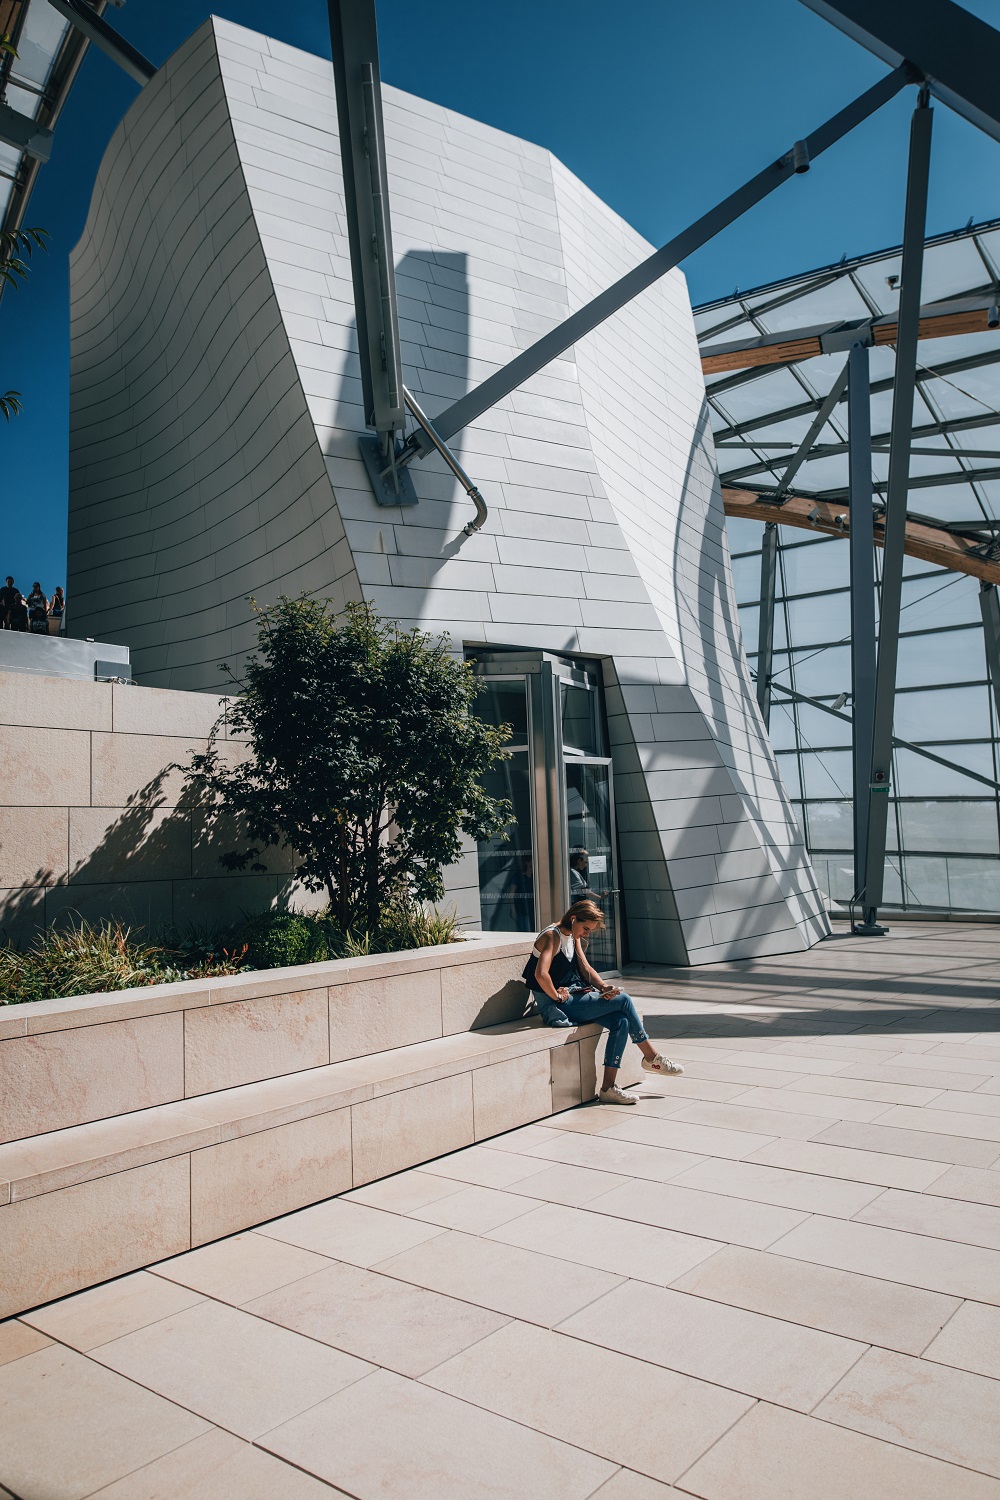 Guide To The Gehry-Designed Fondation Louis Vuitton In Paris - The